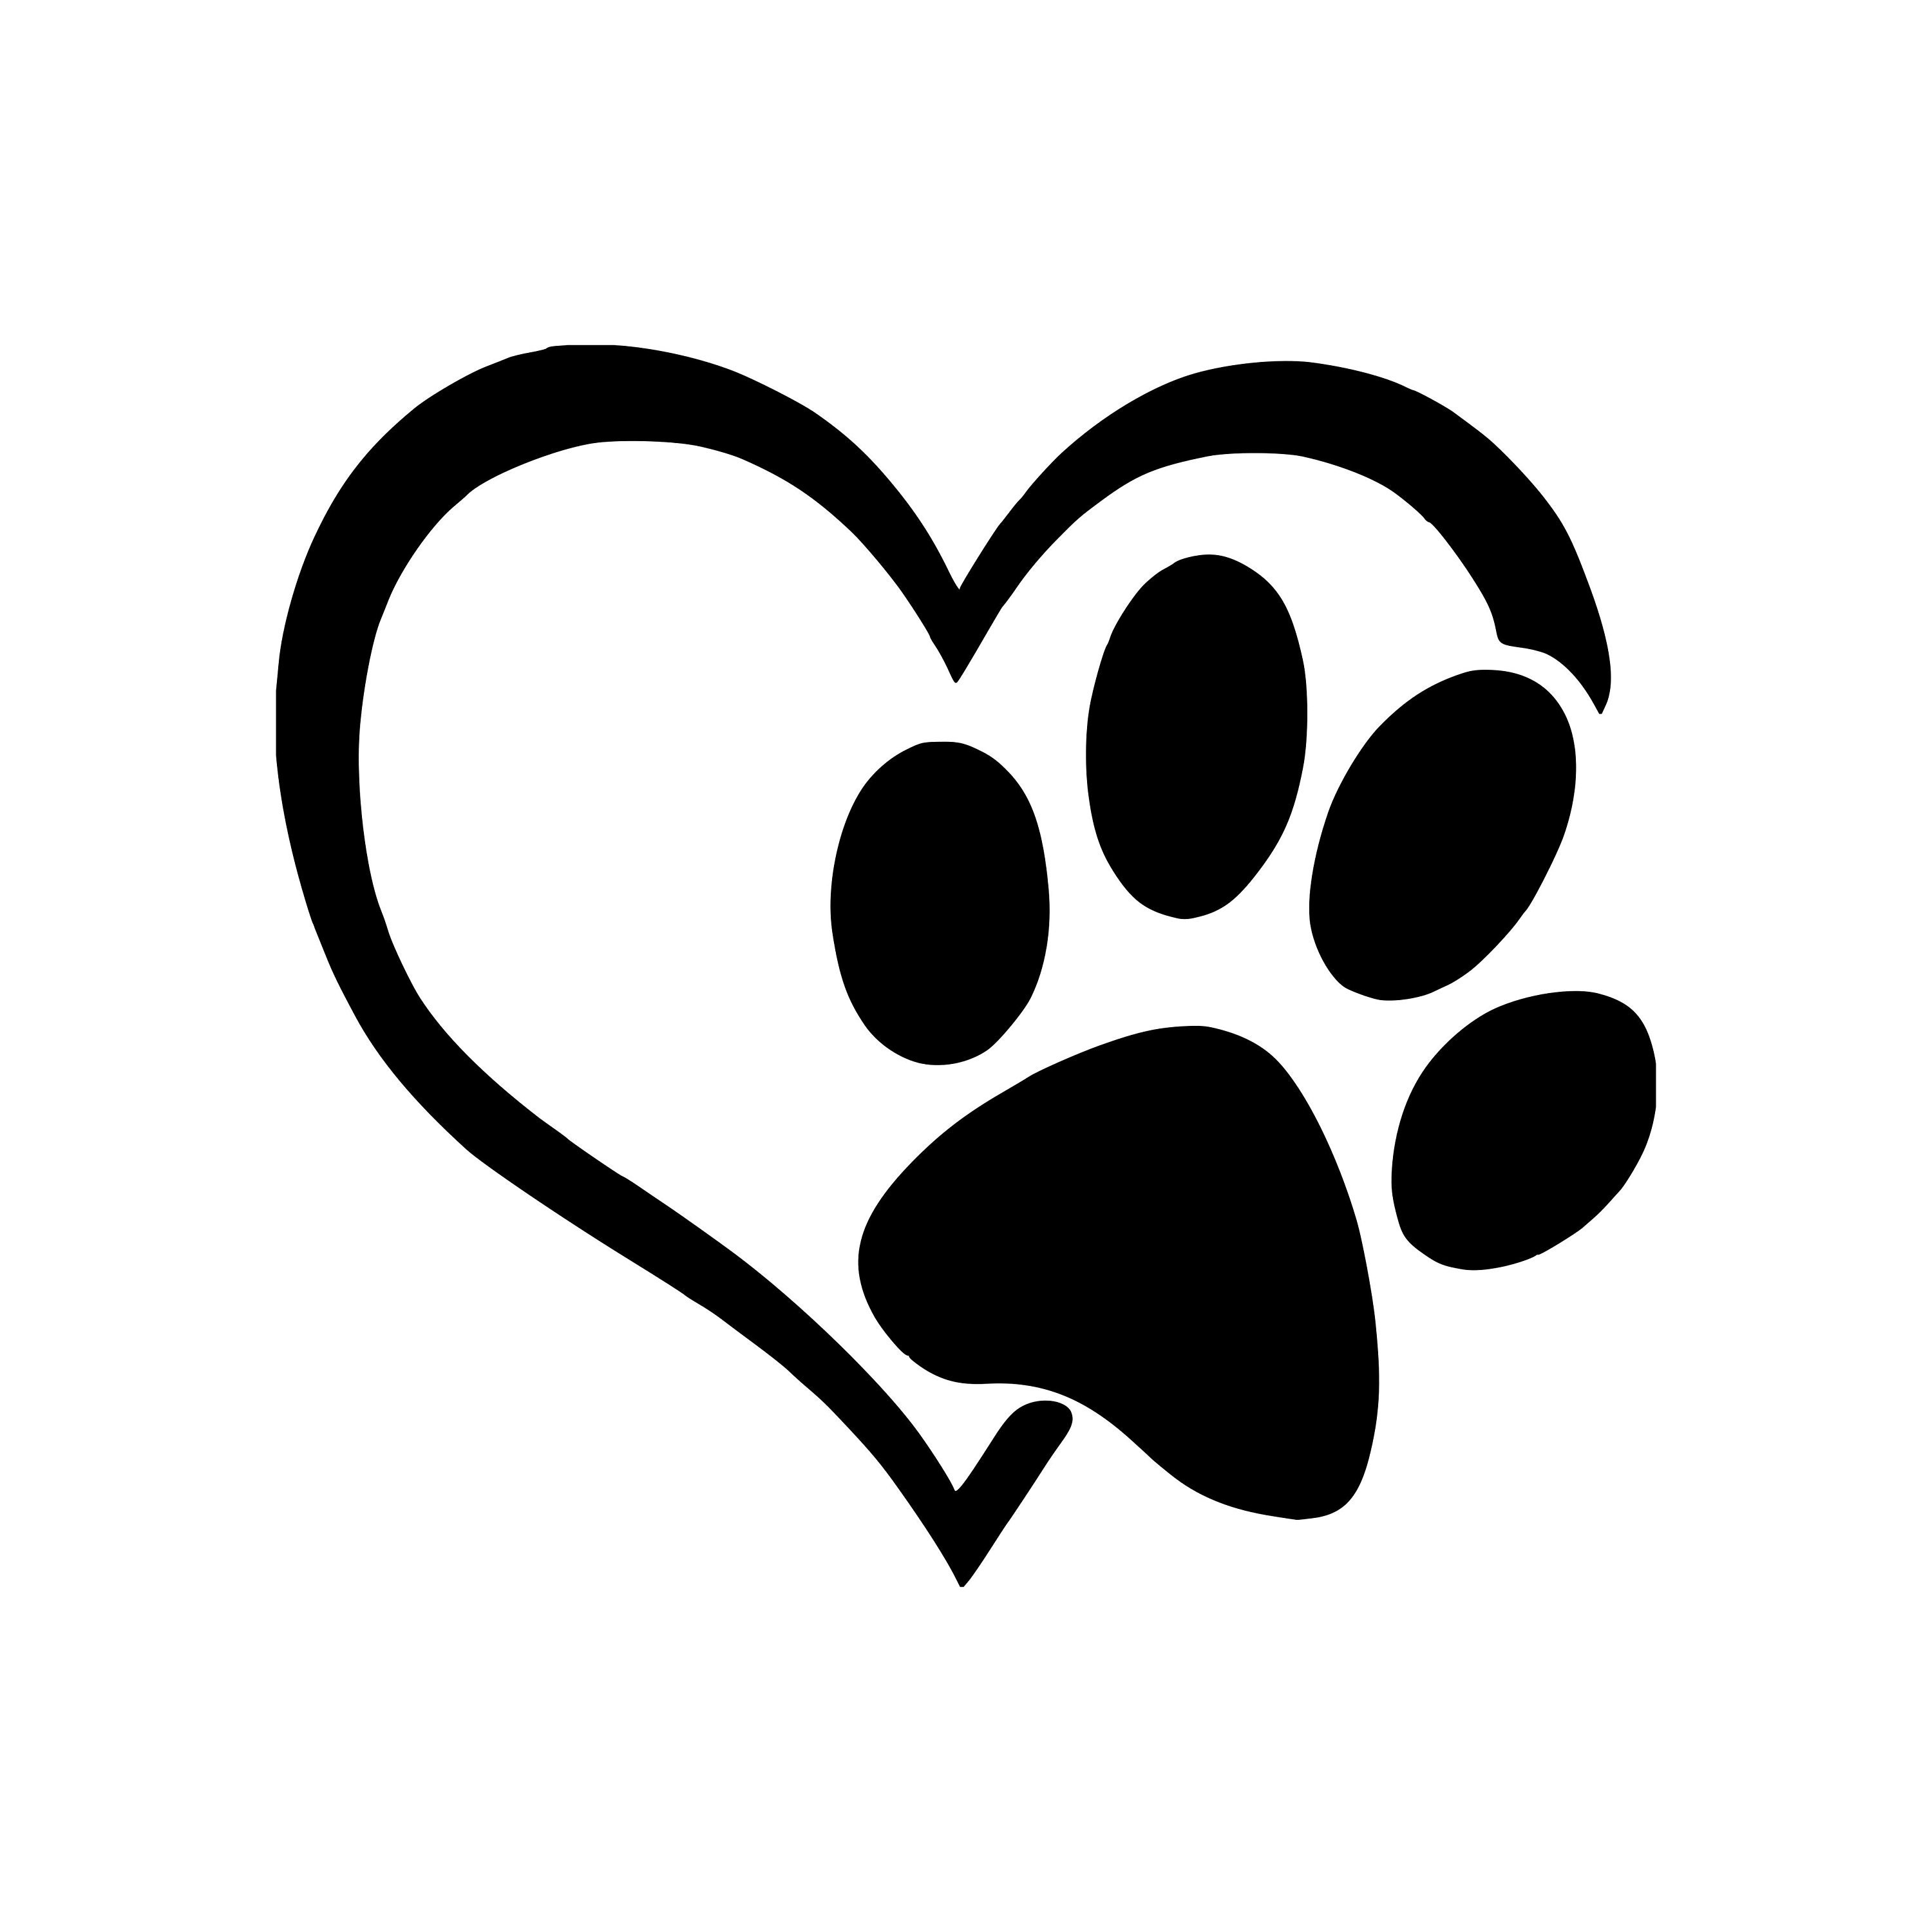 ADOPT DOG CAT PUPPY PAW CUTE ANIMAL PET VINYL DECAL STICKER SIZE COLOR LD-02 